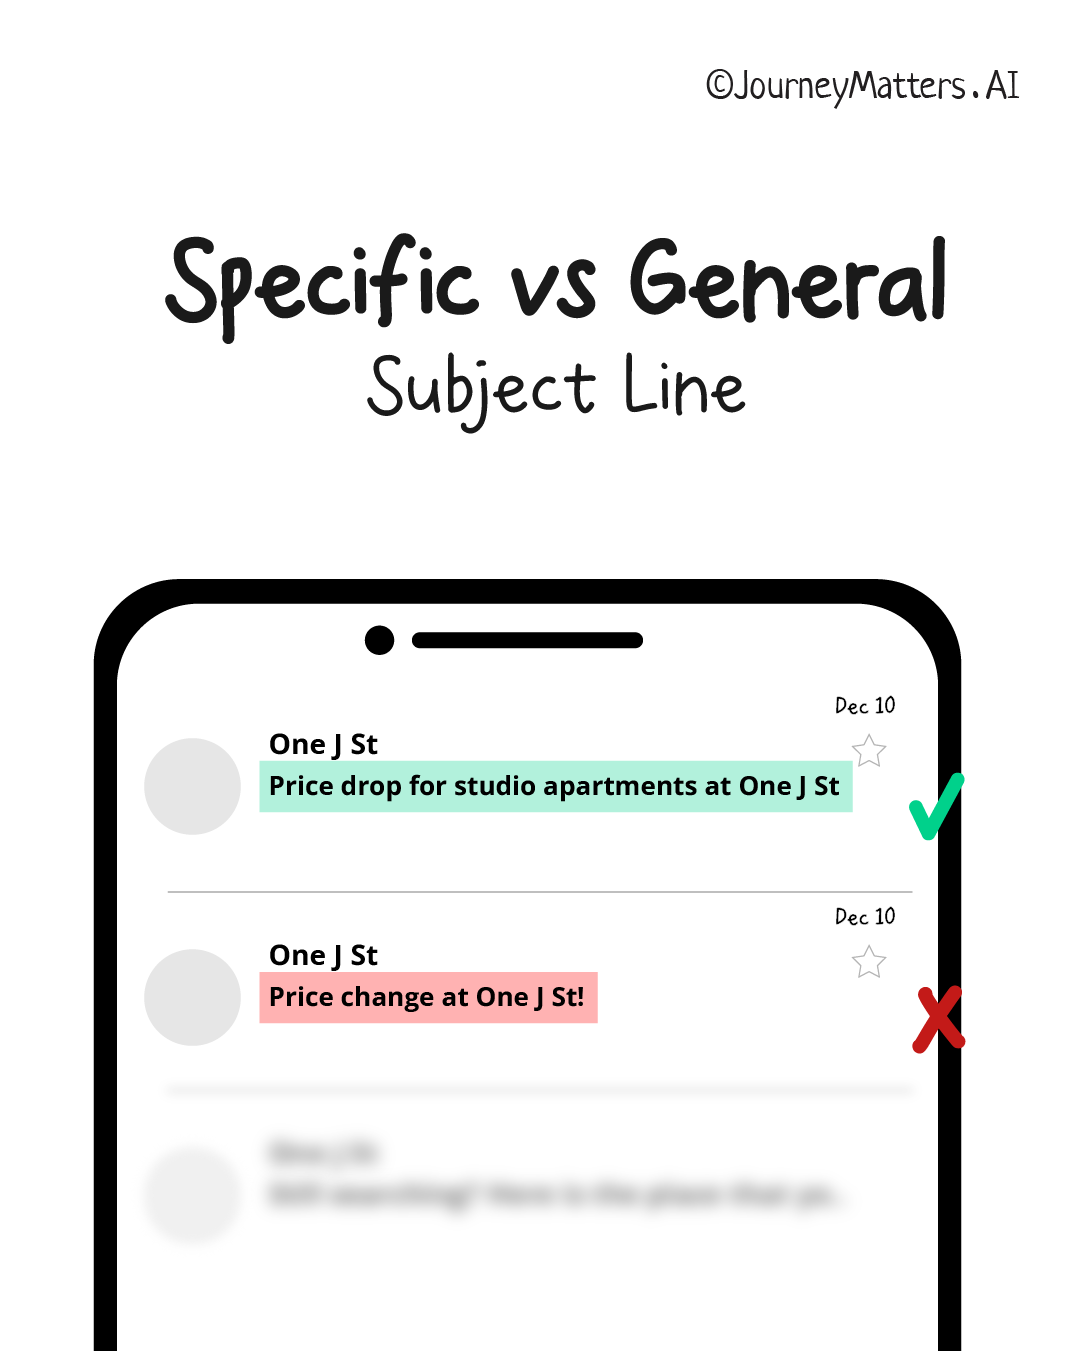 Make the nurture email subject line specific